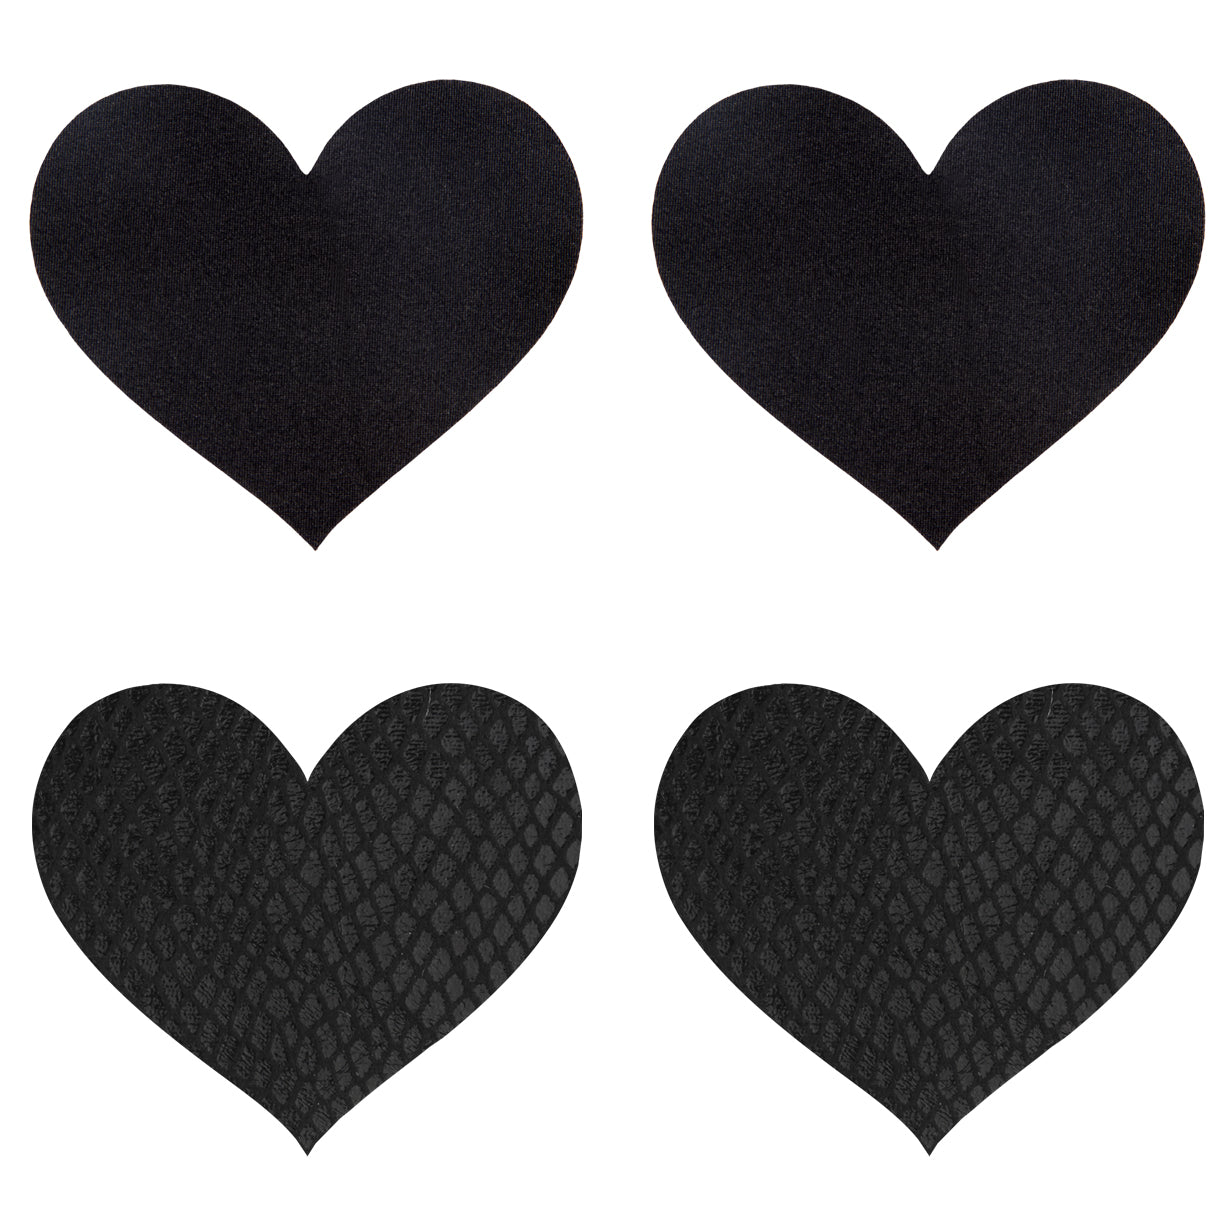 Classic Black Hearts Pasties - Just for you desires